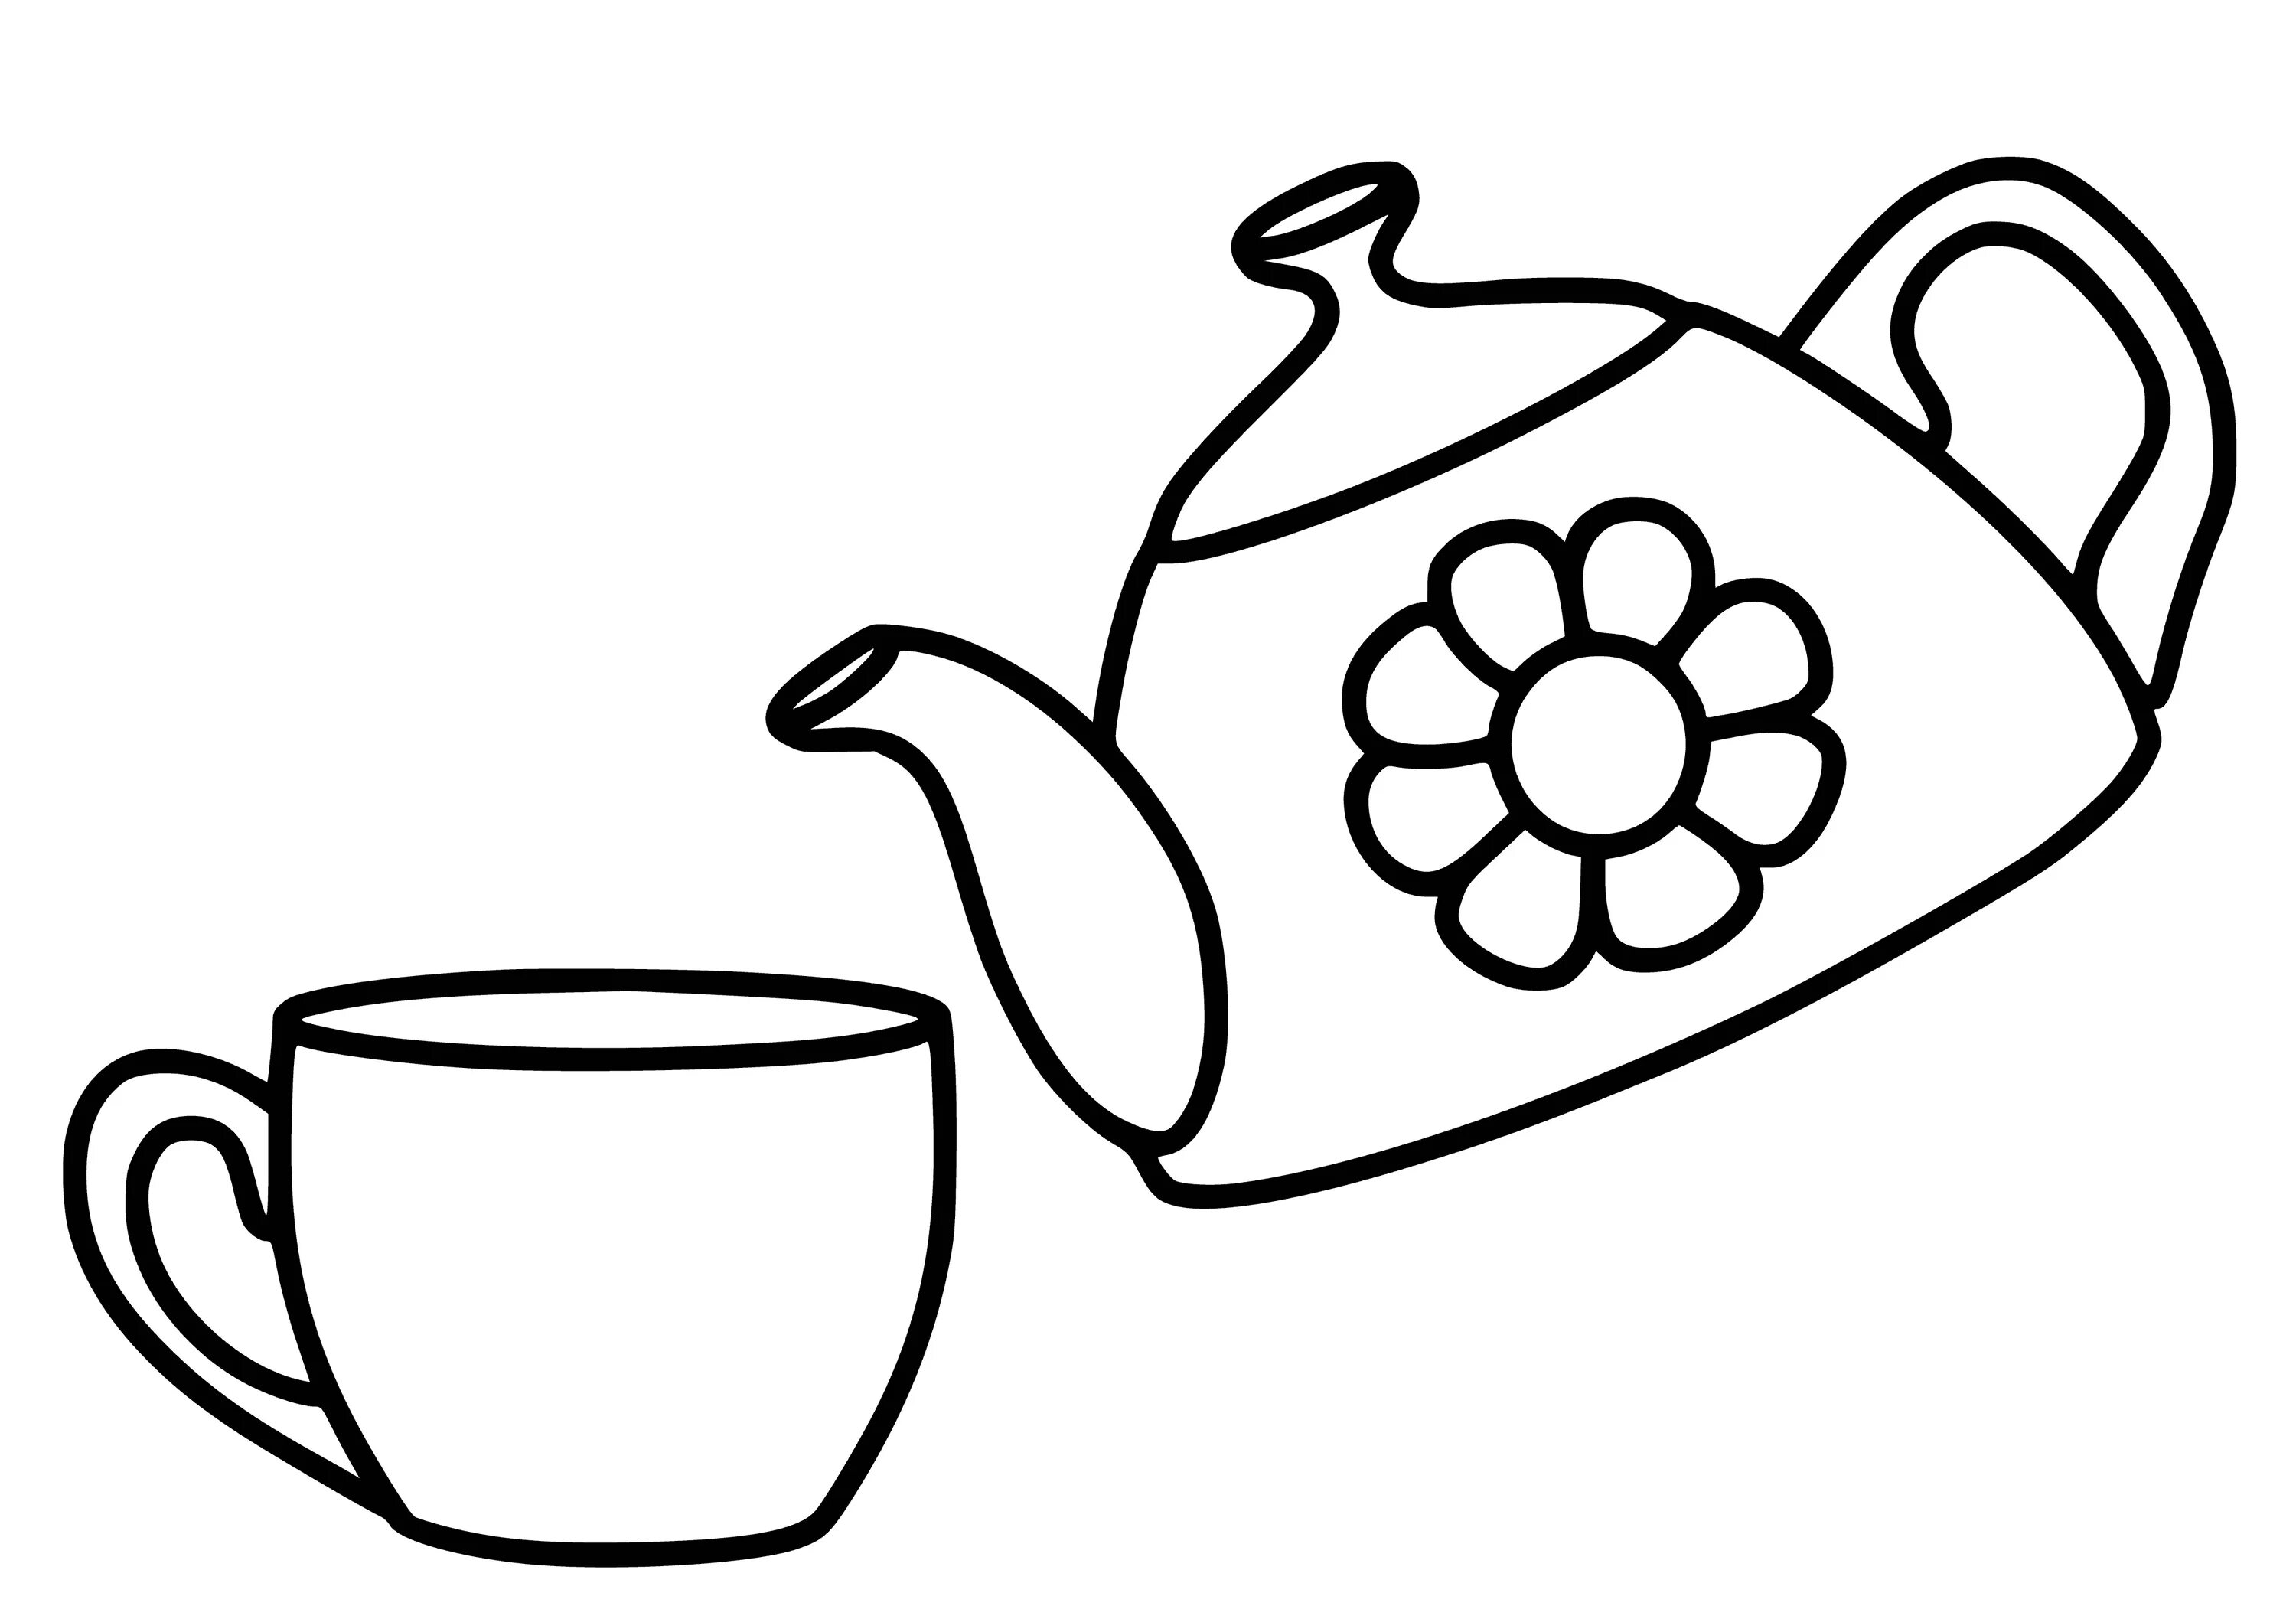 Great teapot coloring book for kids 3-4 years old